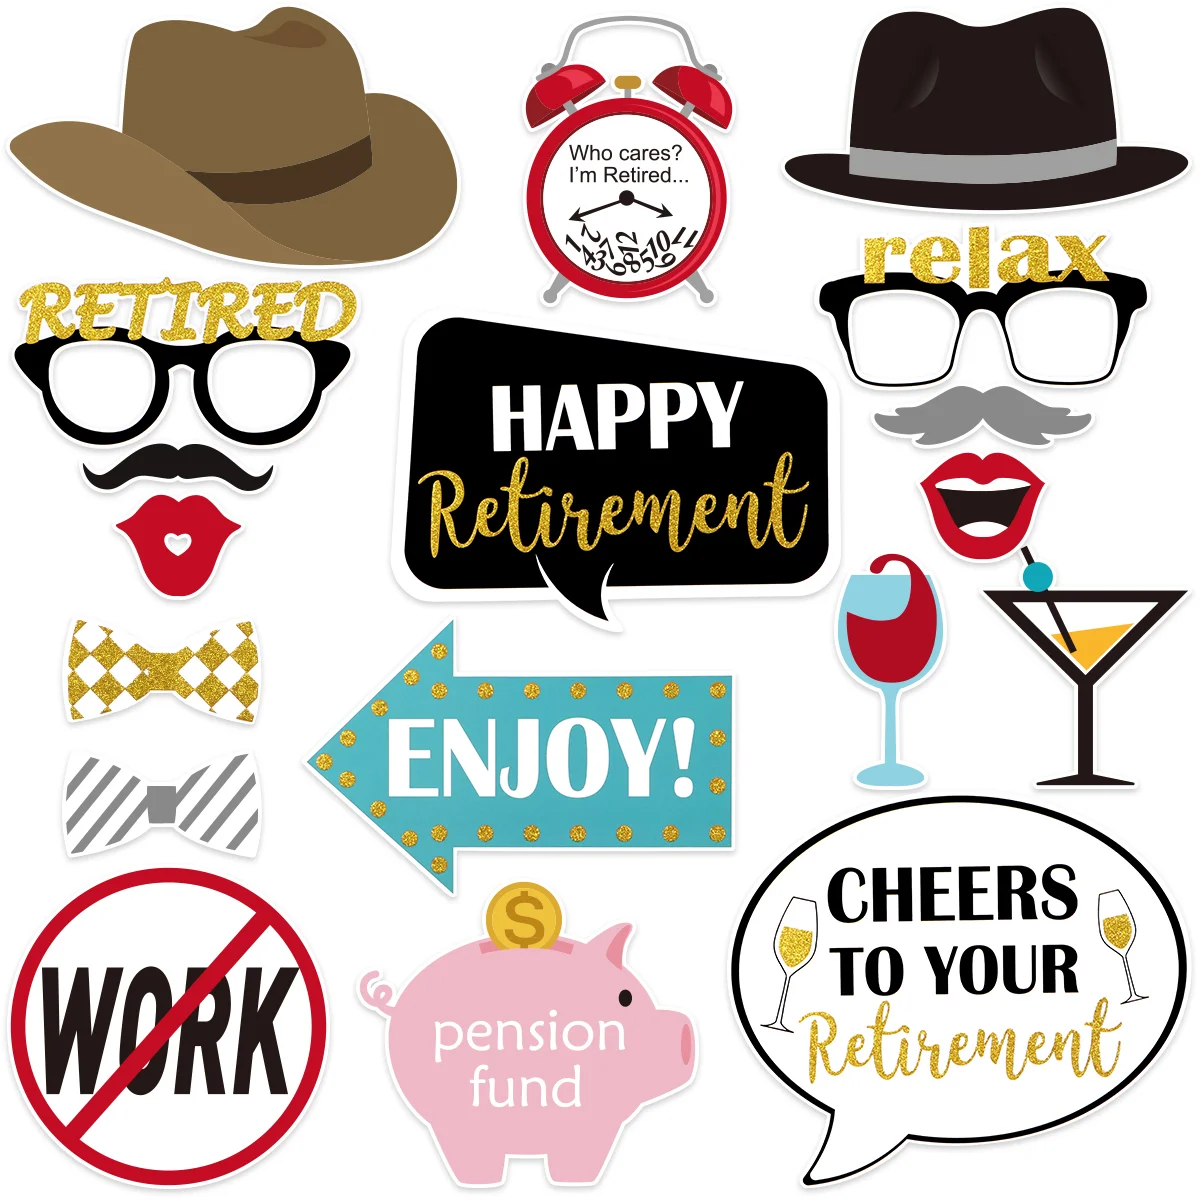 

18PCS Retired Party Photo Booth Props Retirement Party Photo Props Retirement Selfie Decoration Retirement Photo Booth Props